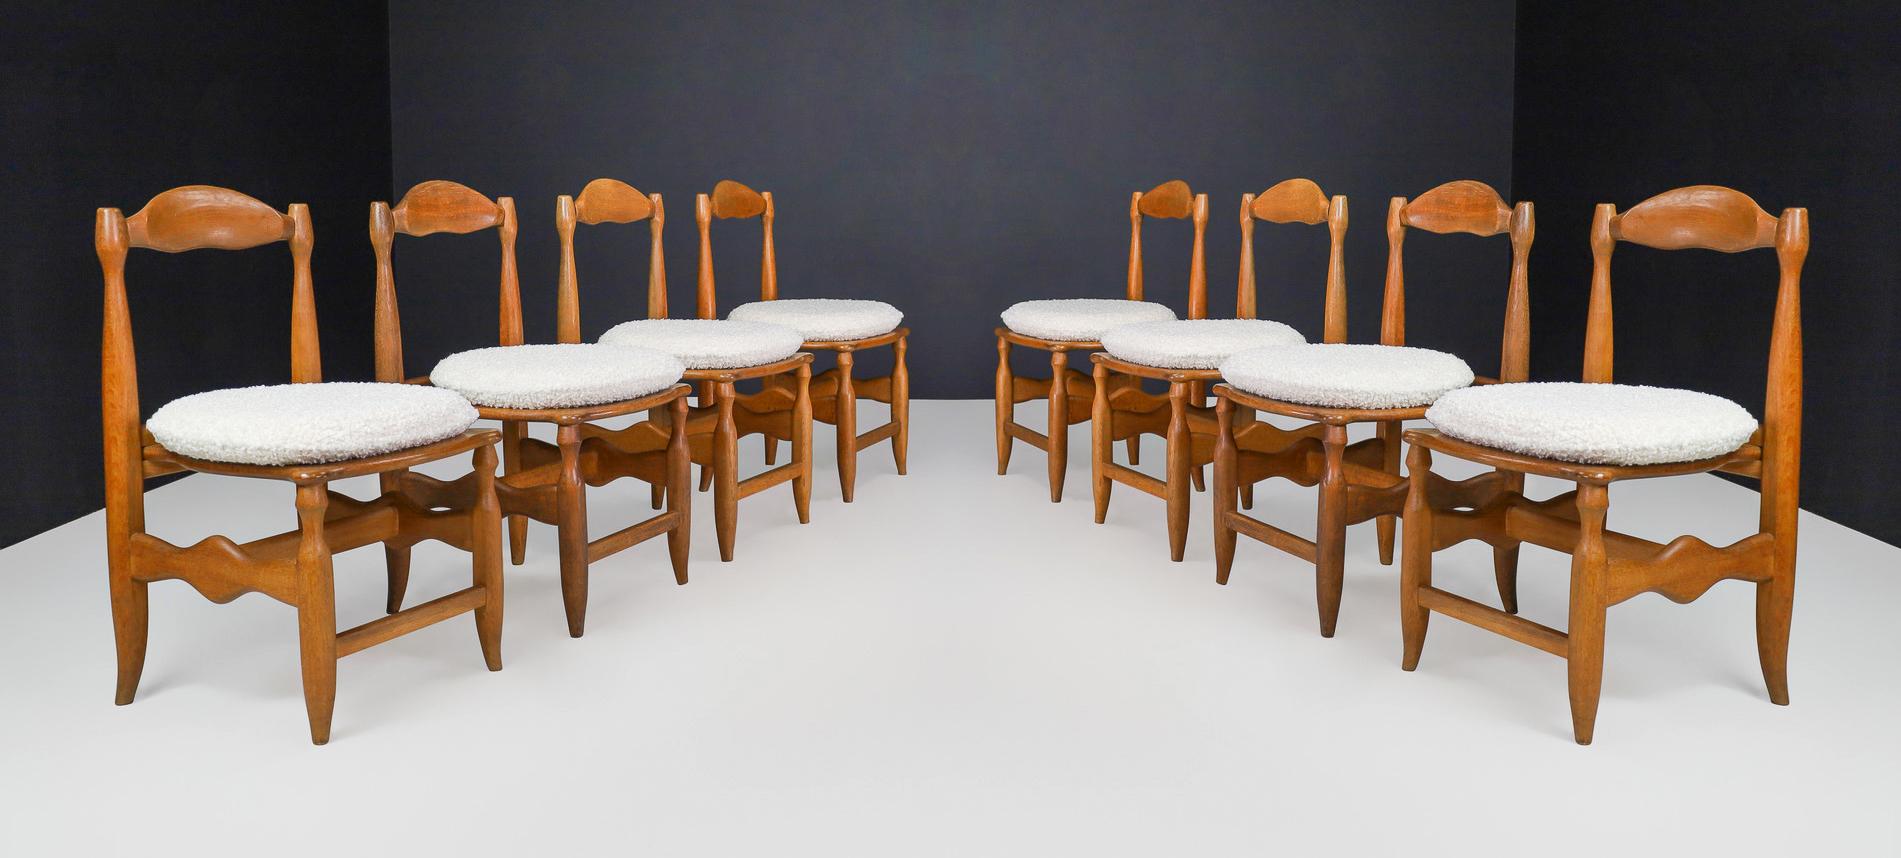 Guillerme & Chambron Set of Eight dining room chairs in Oak and new reupholstered Bouclé cushions, France 1960s

This set of eight dining chairs, crafted by Jacques Chambron and Robert Guillerme in France during the 1960s, is a true masterpiece of